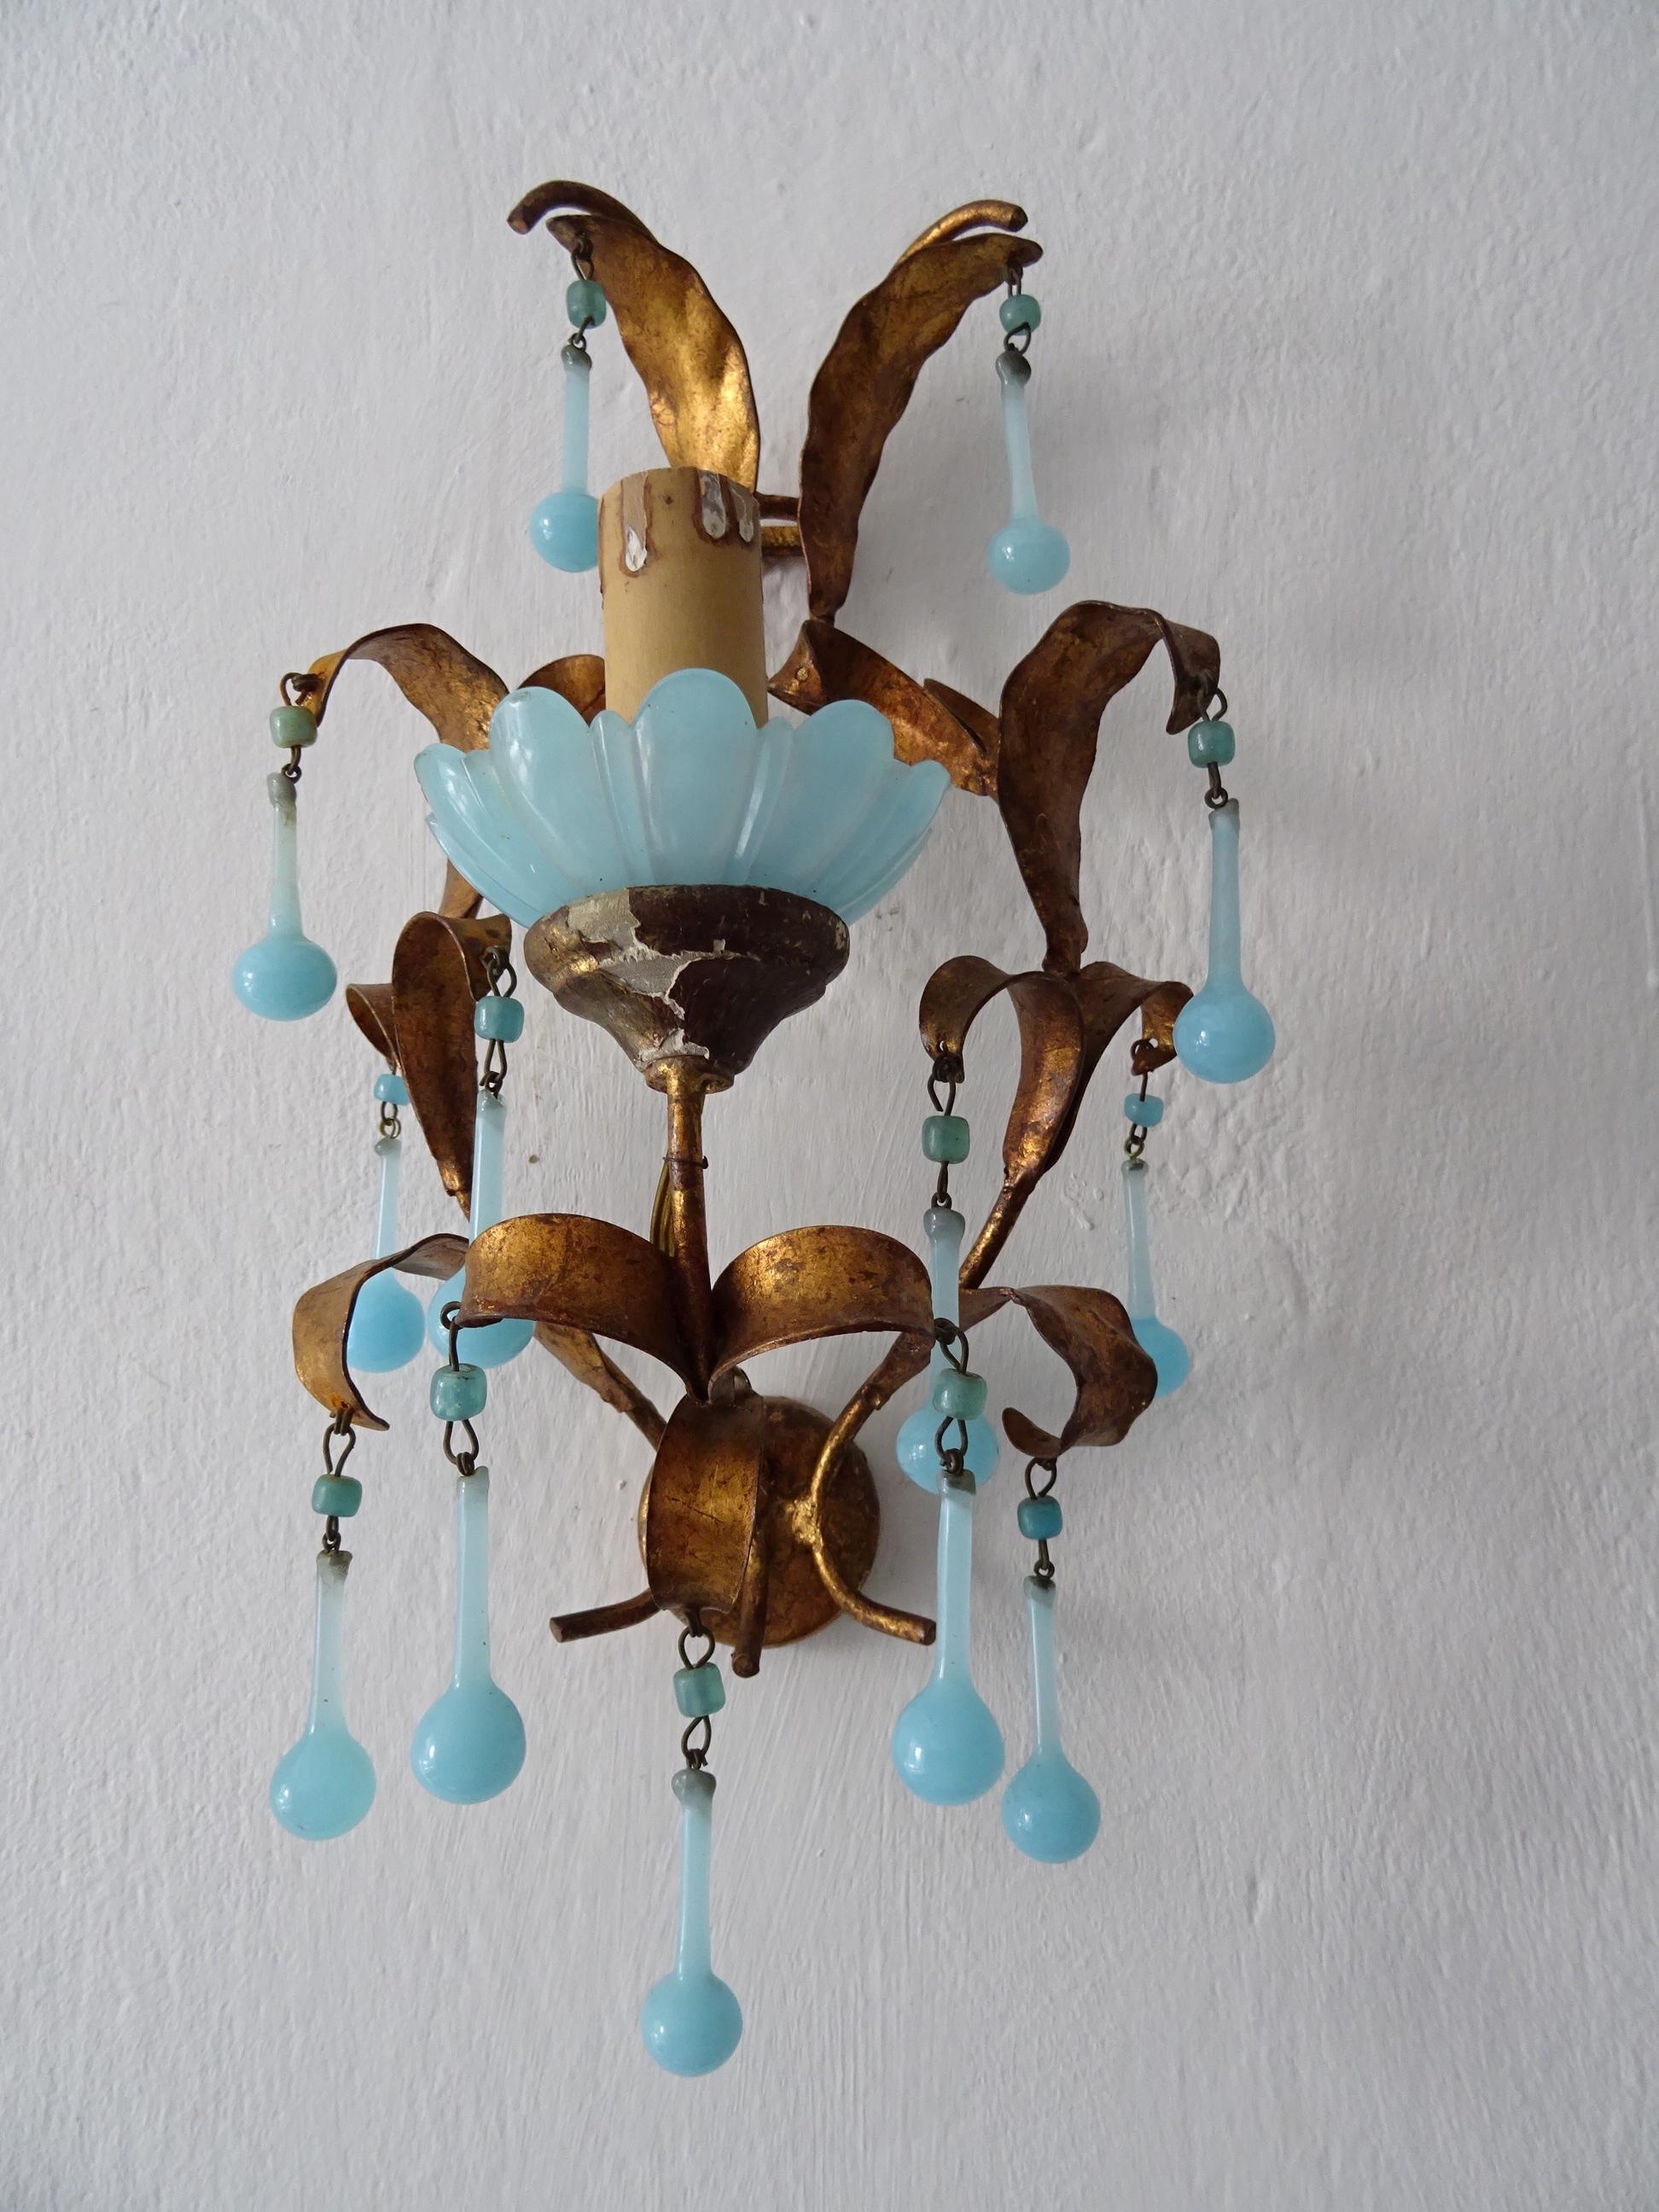 Early 20th Century French Tole Aqua Blue Murano Opaline Drops & Beads Bobeches Sconces For Sale